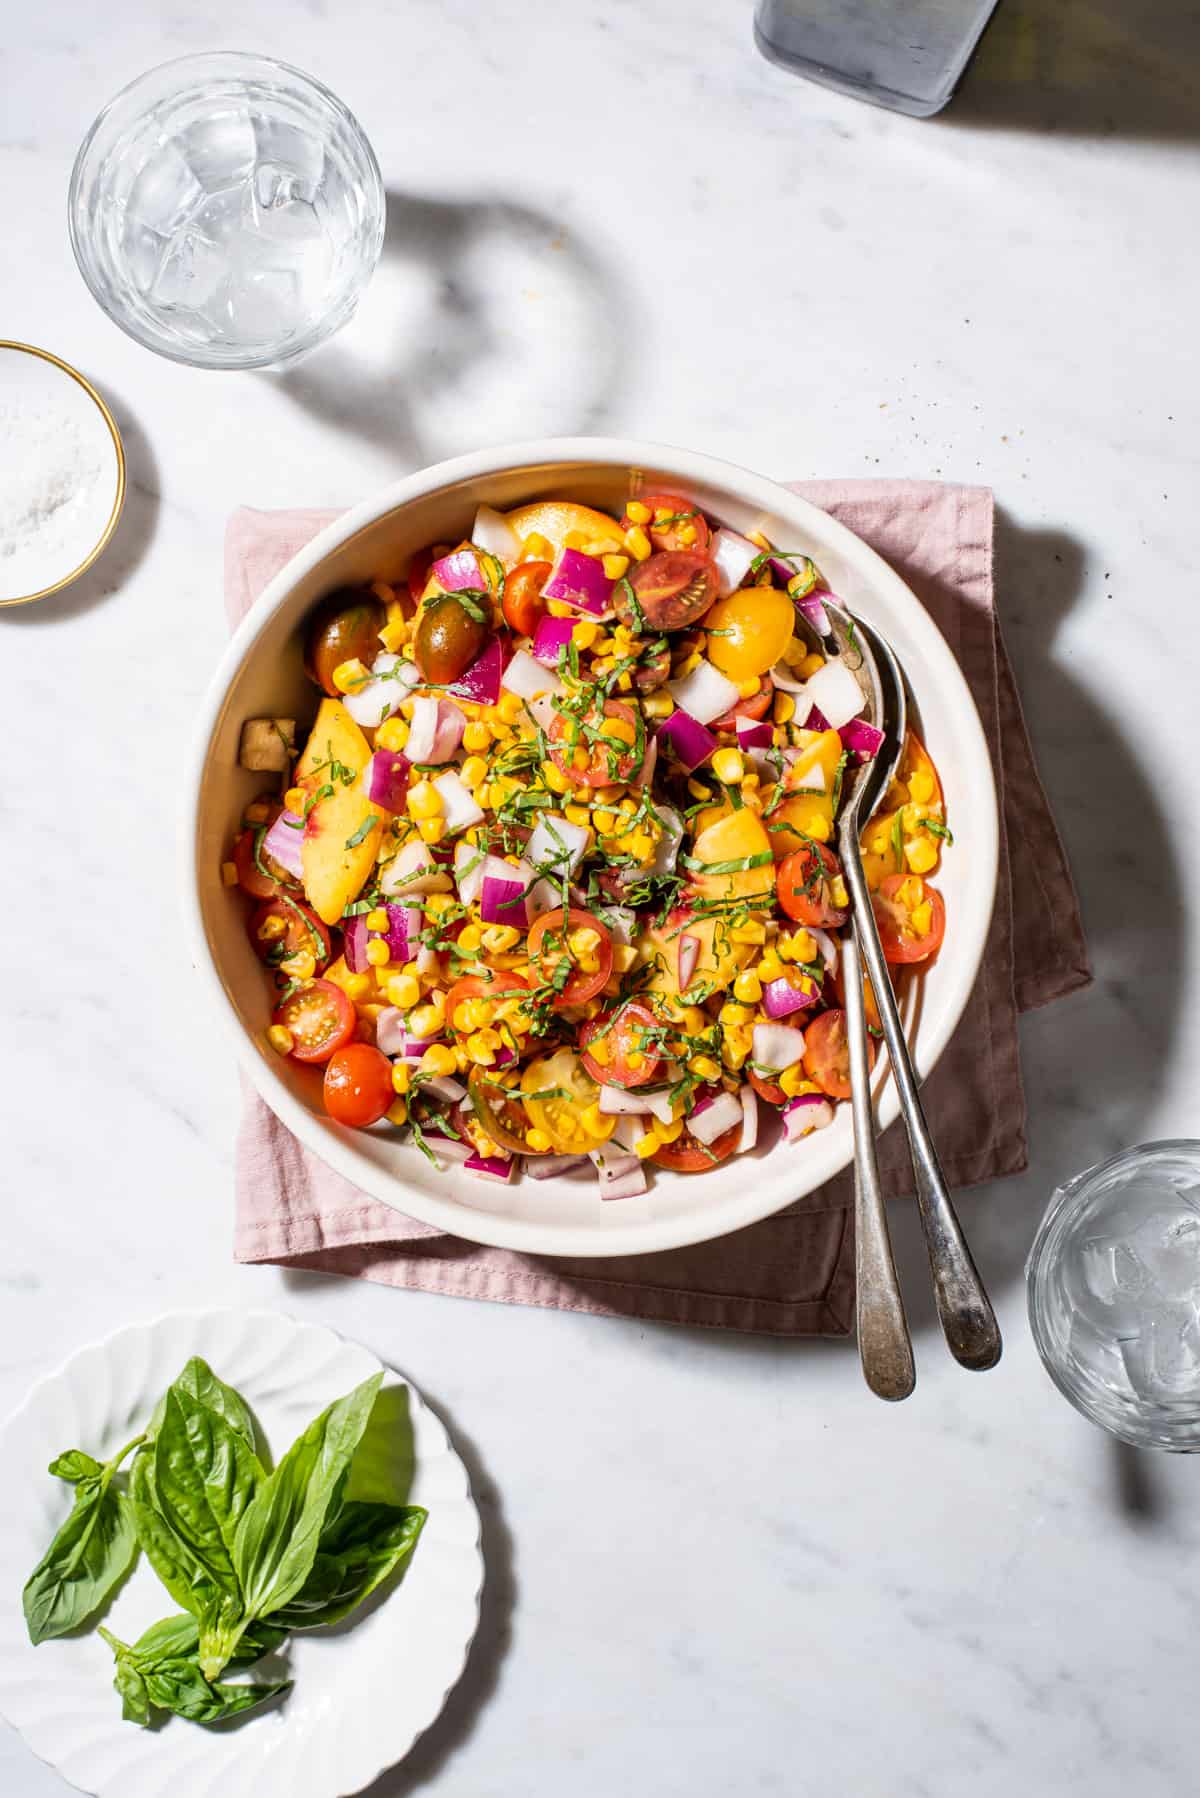 Bowl of tomato peach salad with corn next to a pile of basil on a marble table.